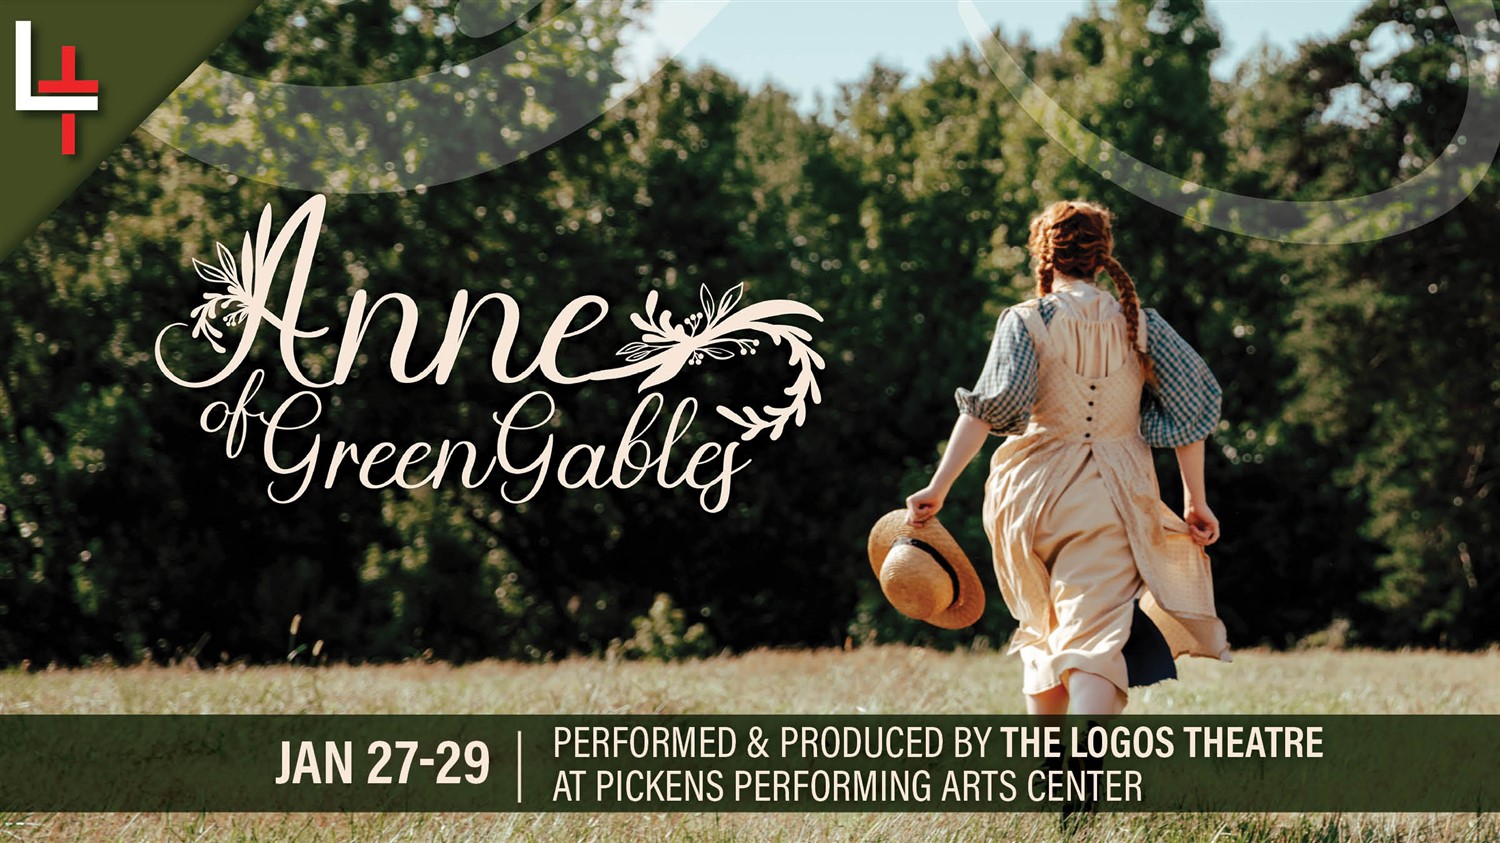 Anne of Green Gables A Logos Theatre Production on Jan 31, 00:00@Pickens County Performing Arts Center - Buy tickets and Get information on Take Part Tickets takepartickets.com